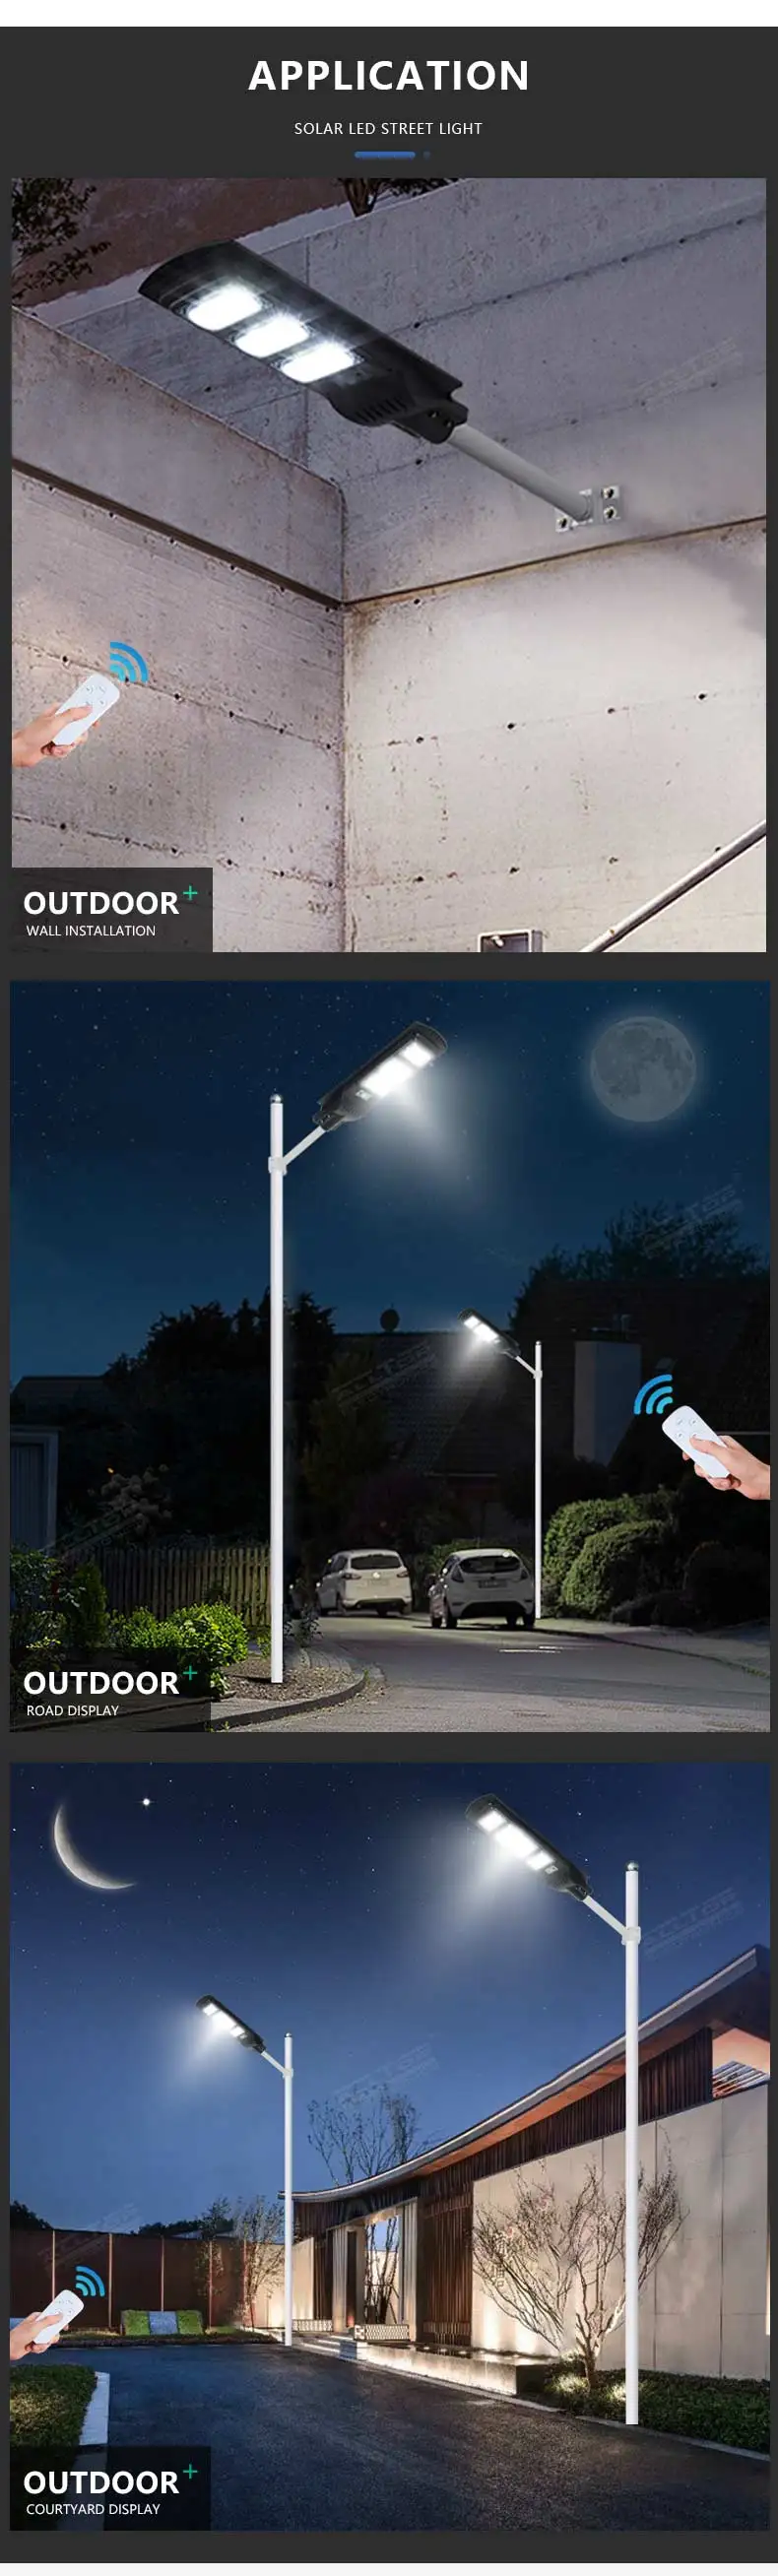 ALLTOP Factory price outdoor courtyard lighting waterproof ip65 30w 60w 90w integrated all in one solar led street light